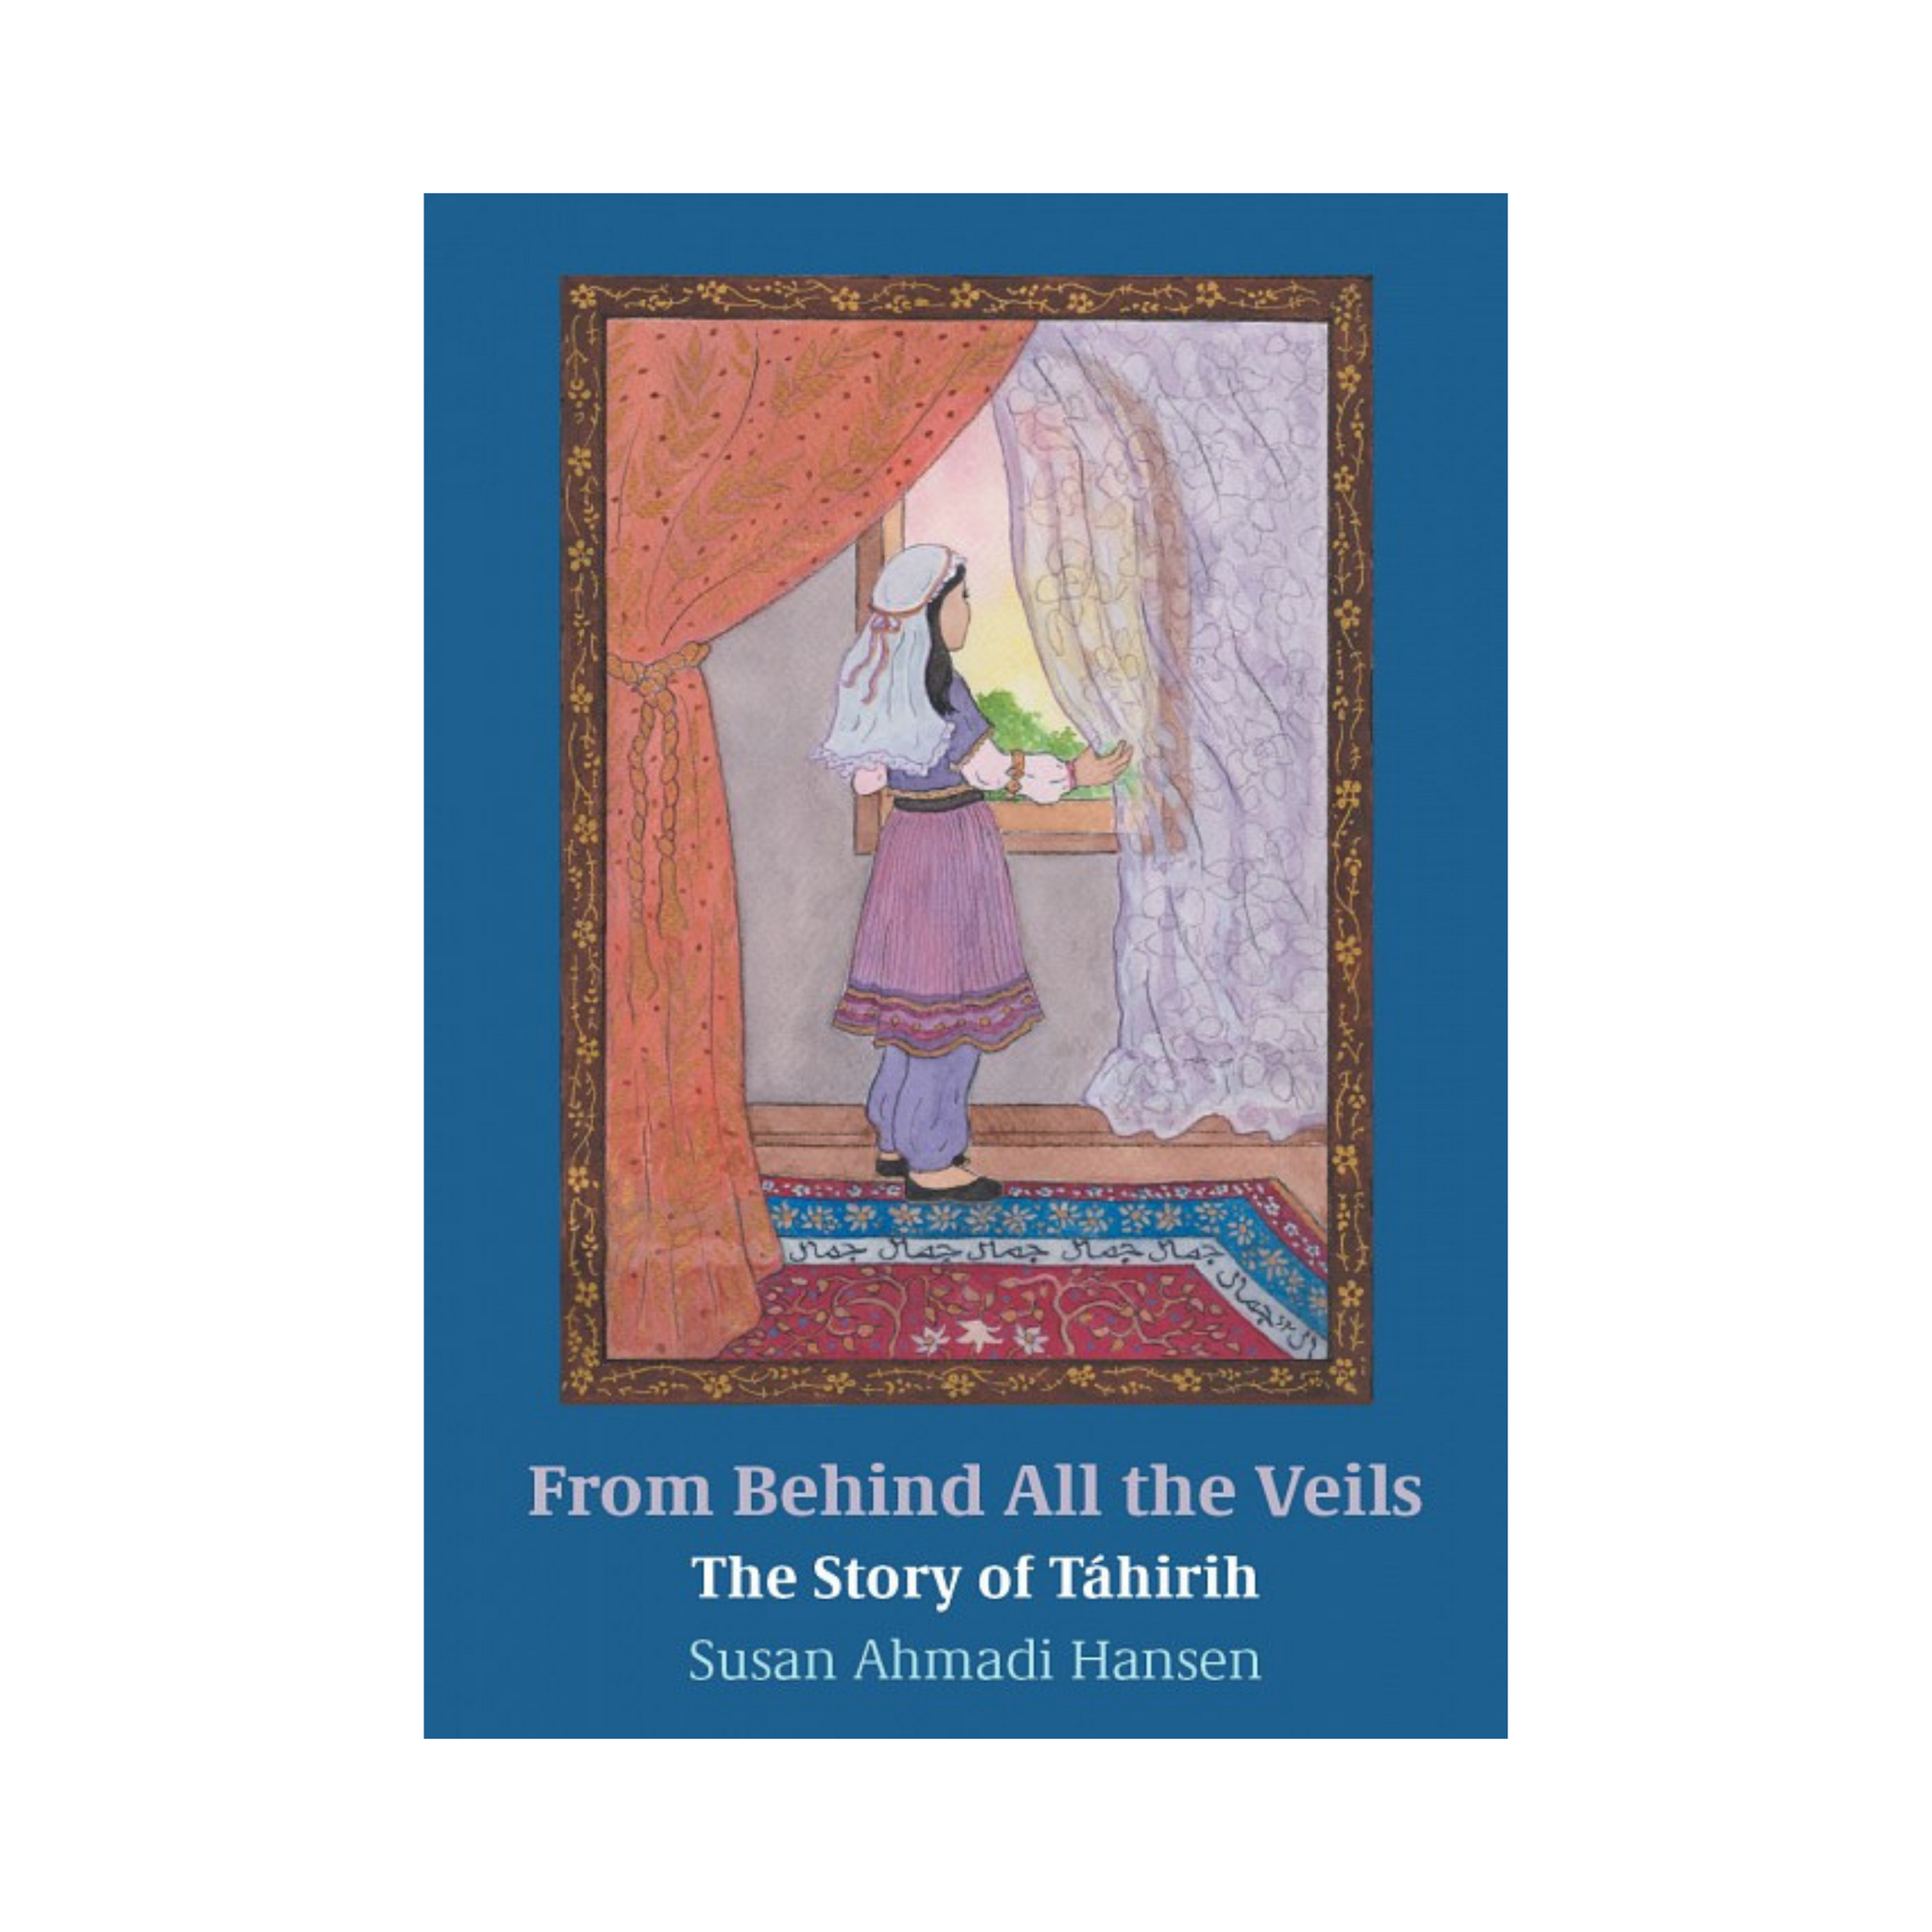 From Behind All The Veils - The Story of Tahirih